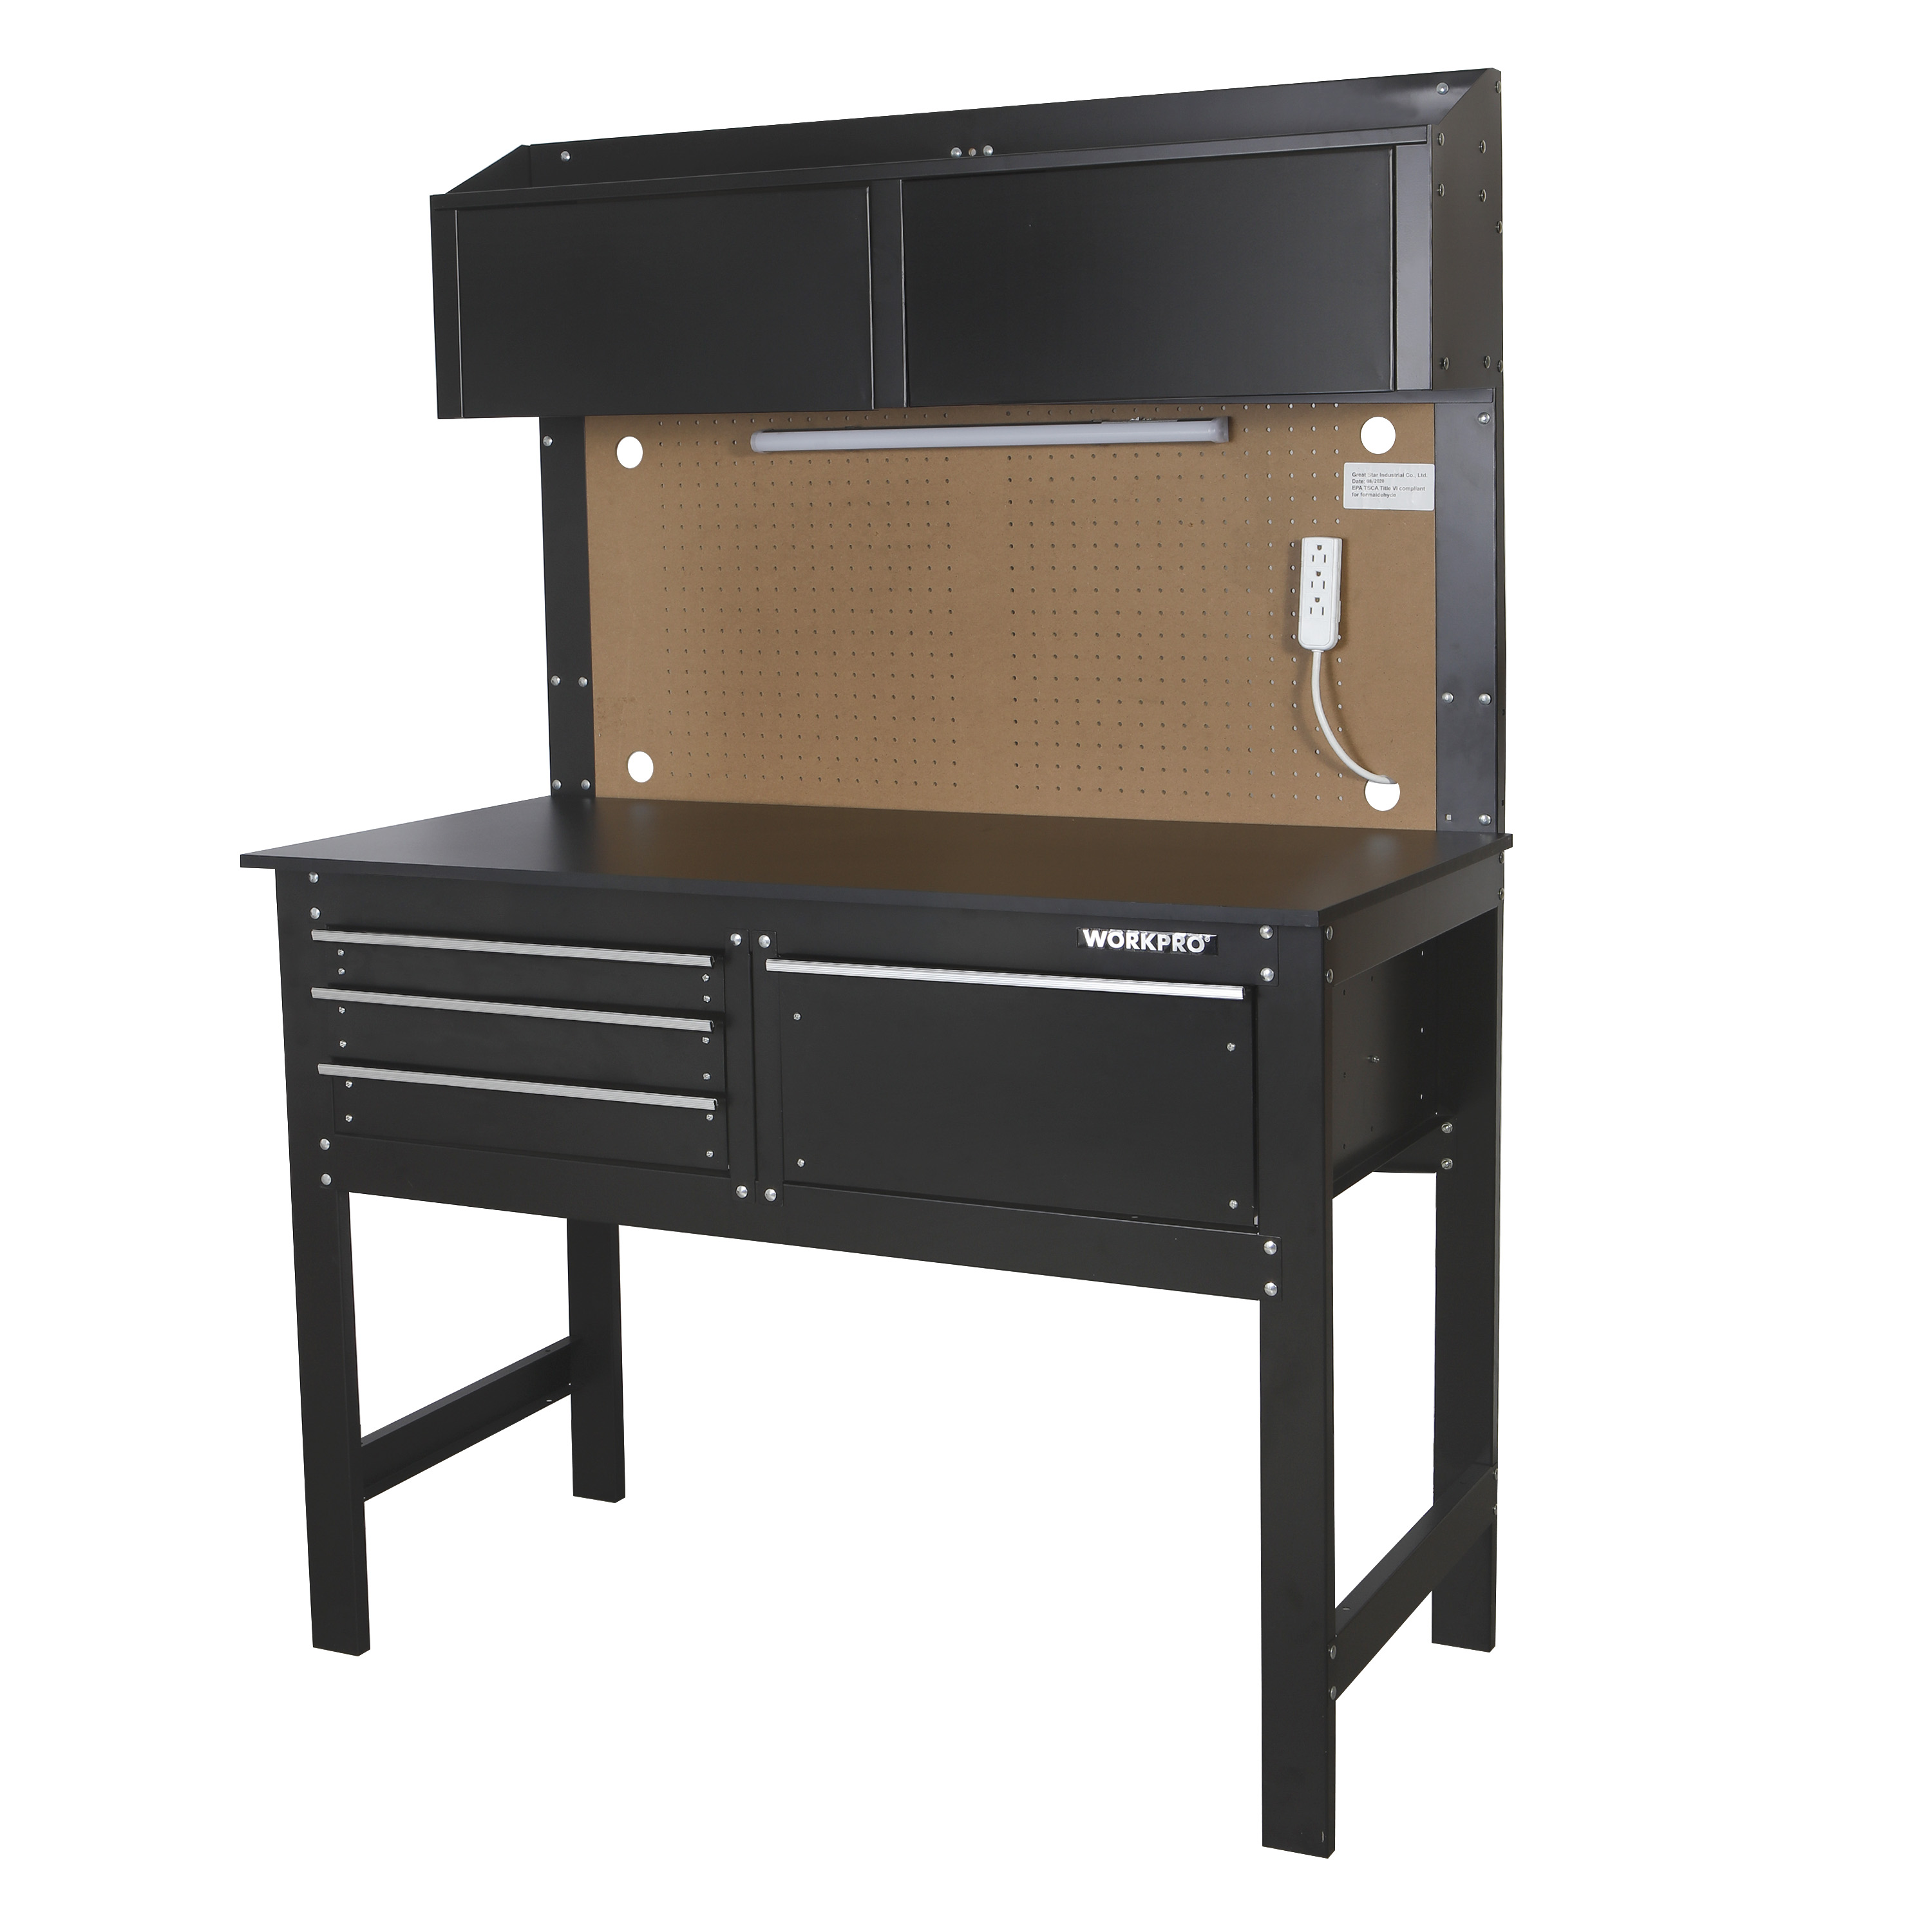 WORKPRO 2-in-1 48-inch Workbench and Cabinet Combo with Light, Steel, Wood - image 1 of 9